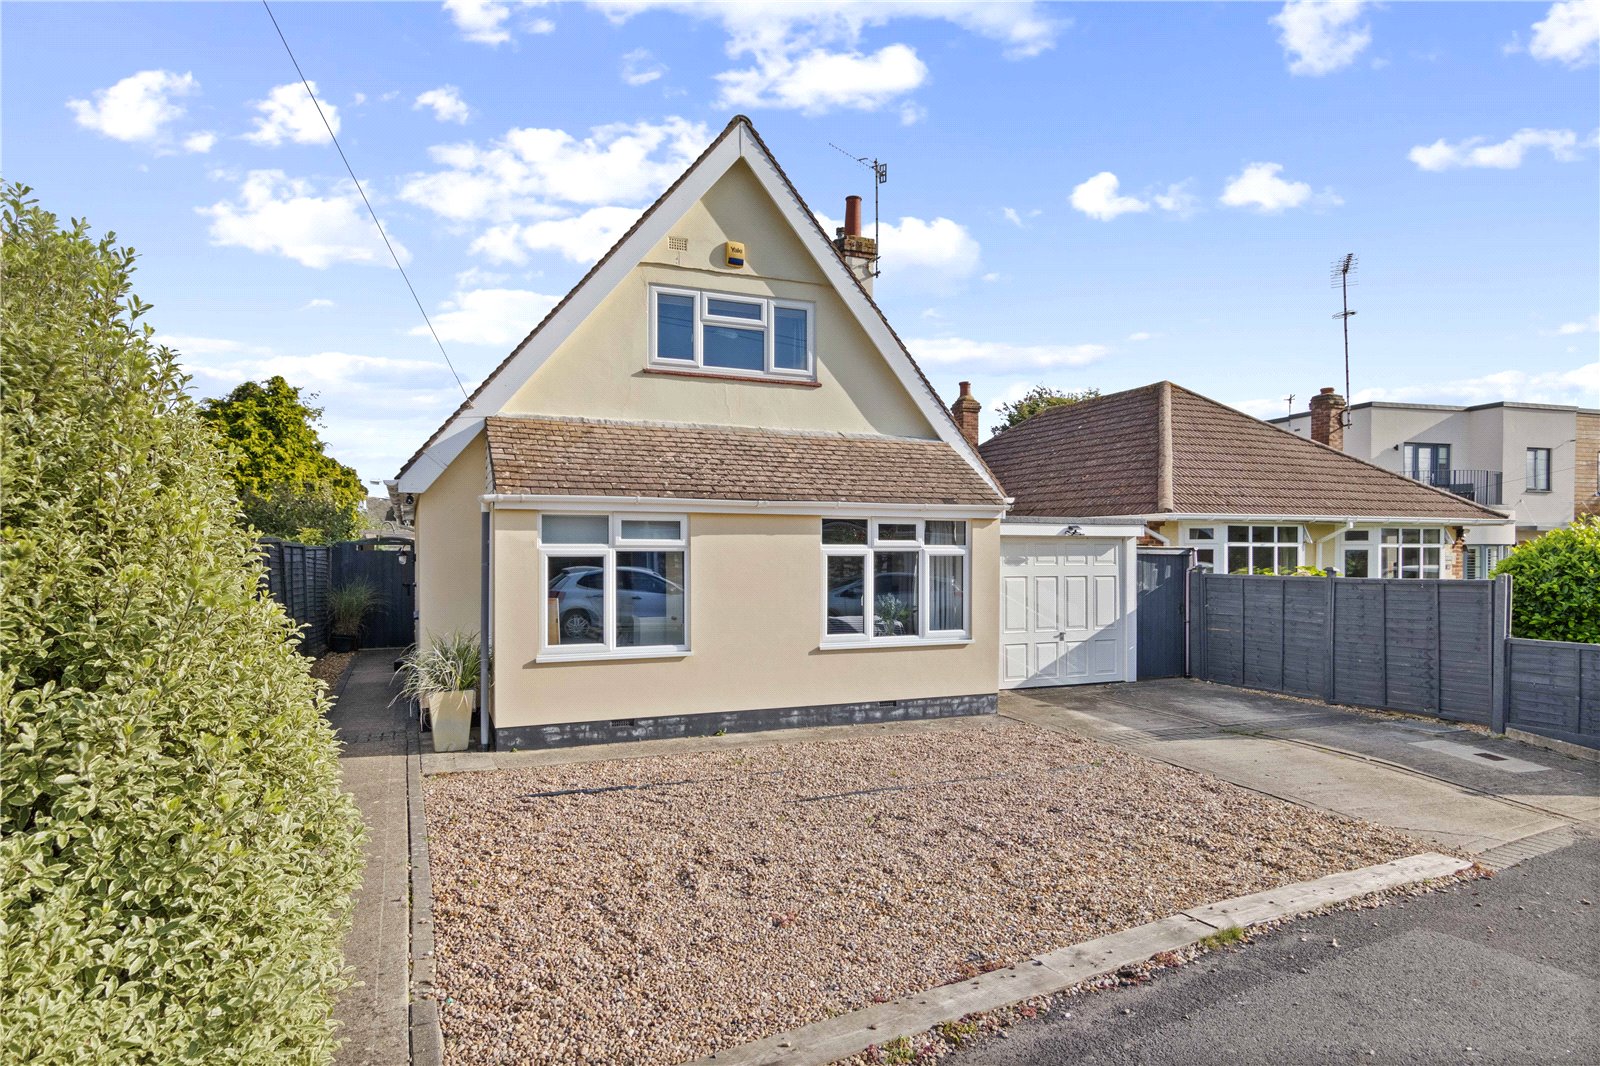 3 bed house for sale in North Avenue, Middleton On Sea - Property Image 1